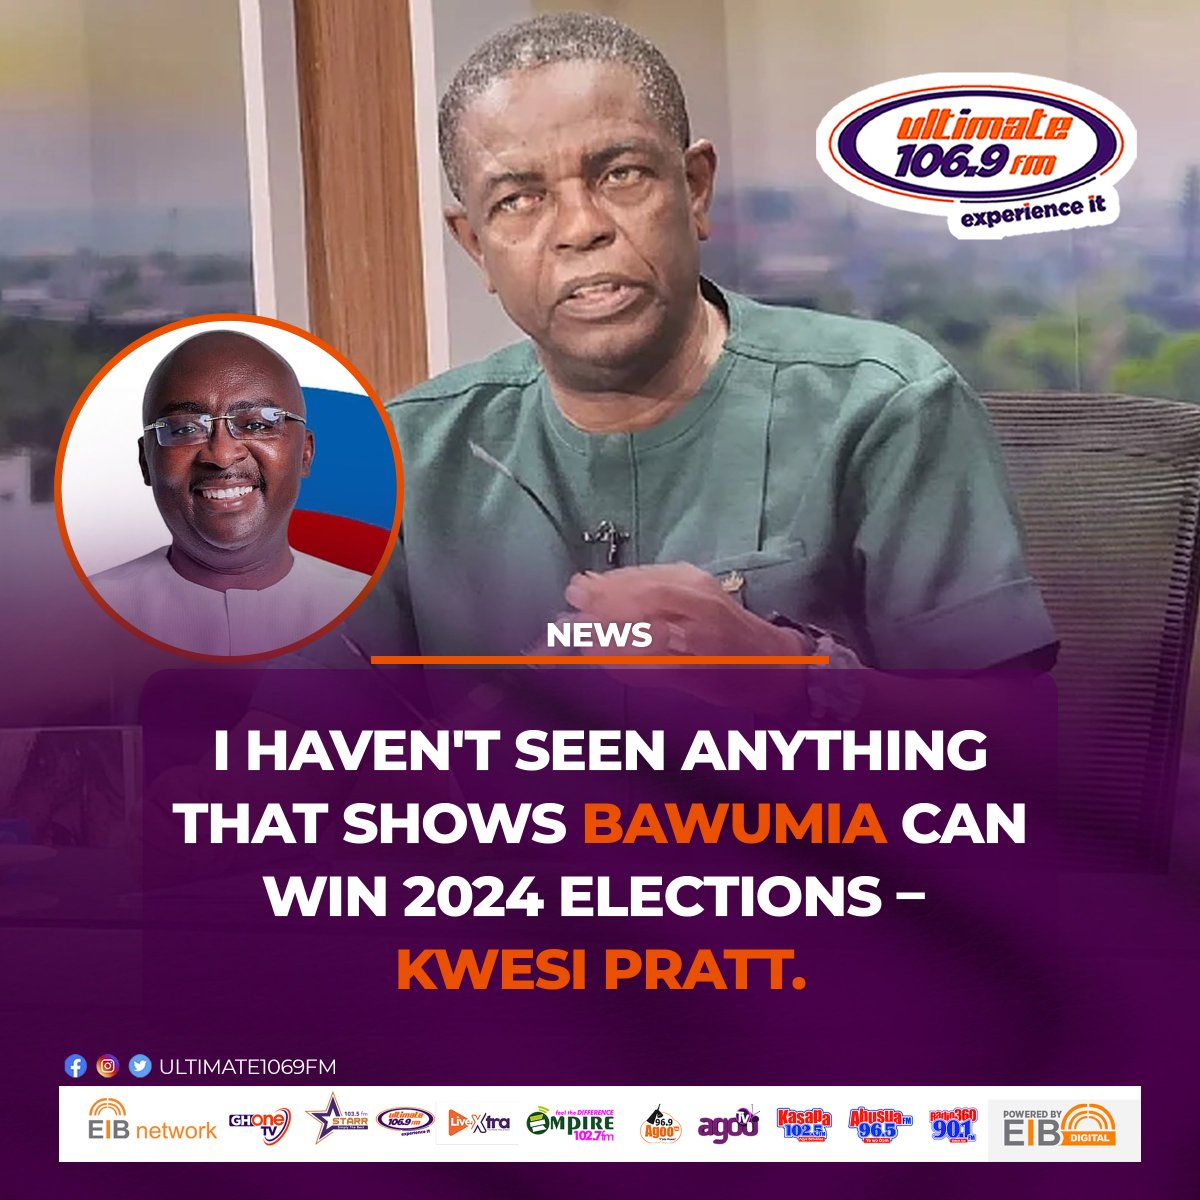 #UltimateNewsUpdate I haven't seen anything that shows Bawumia can win 2024 elections – Kwesi Pratt